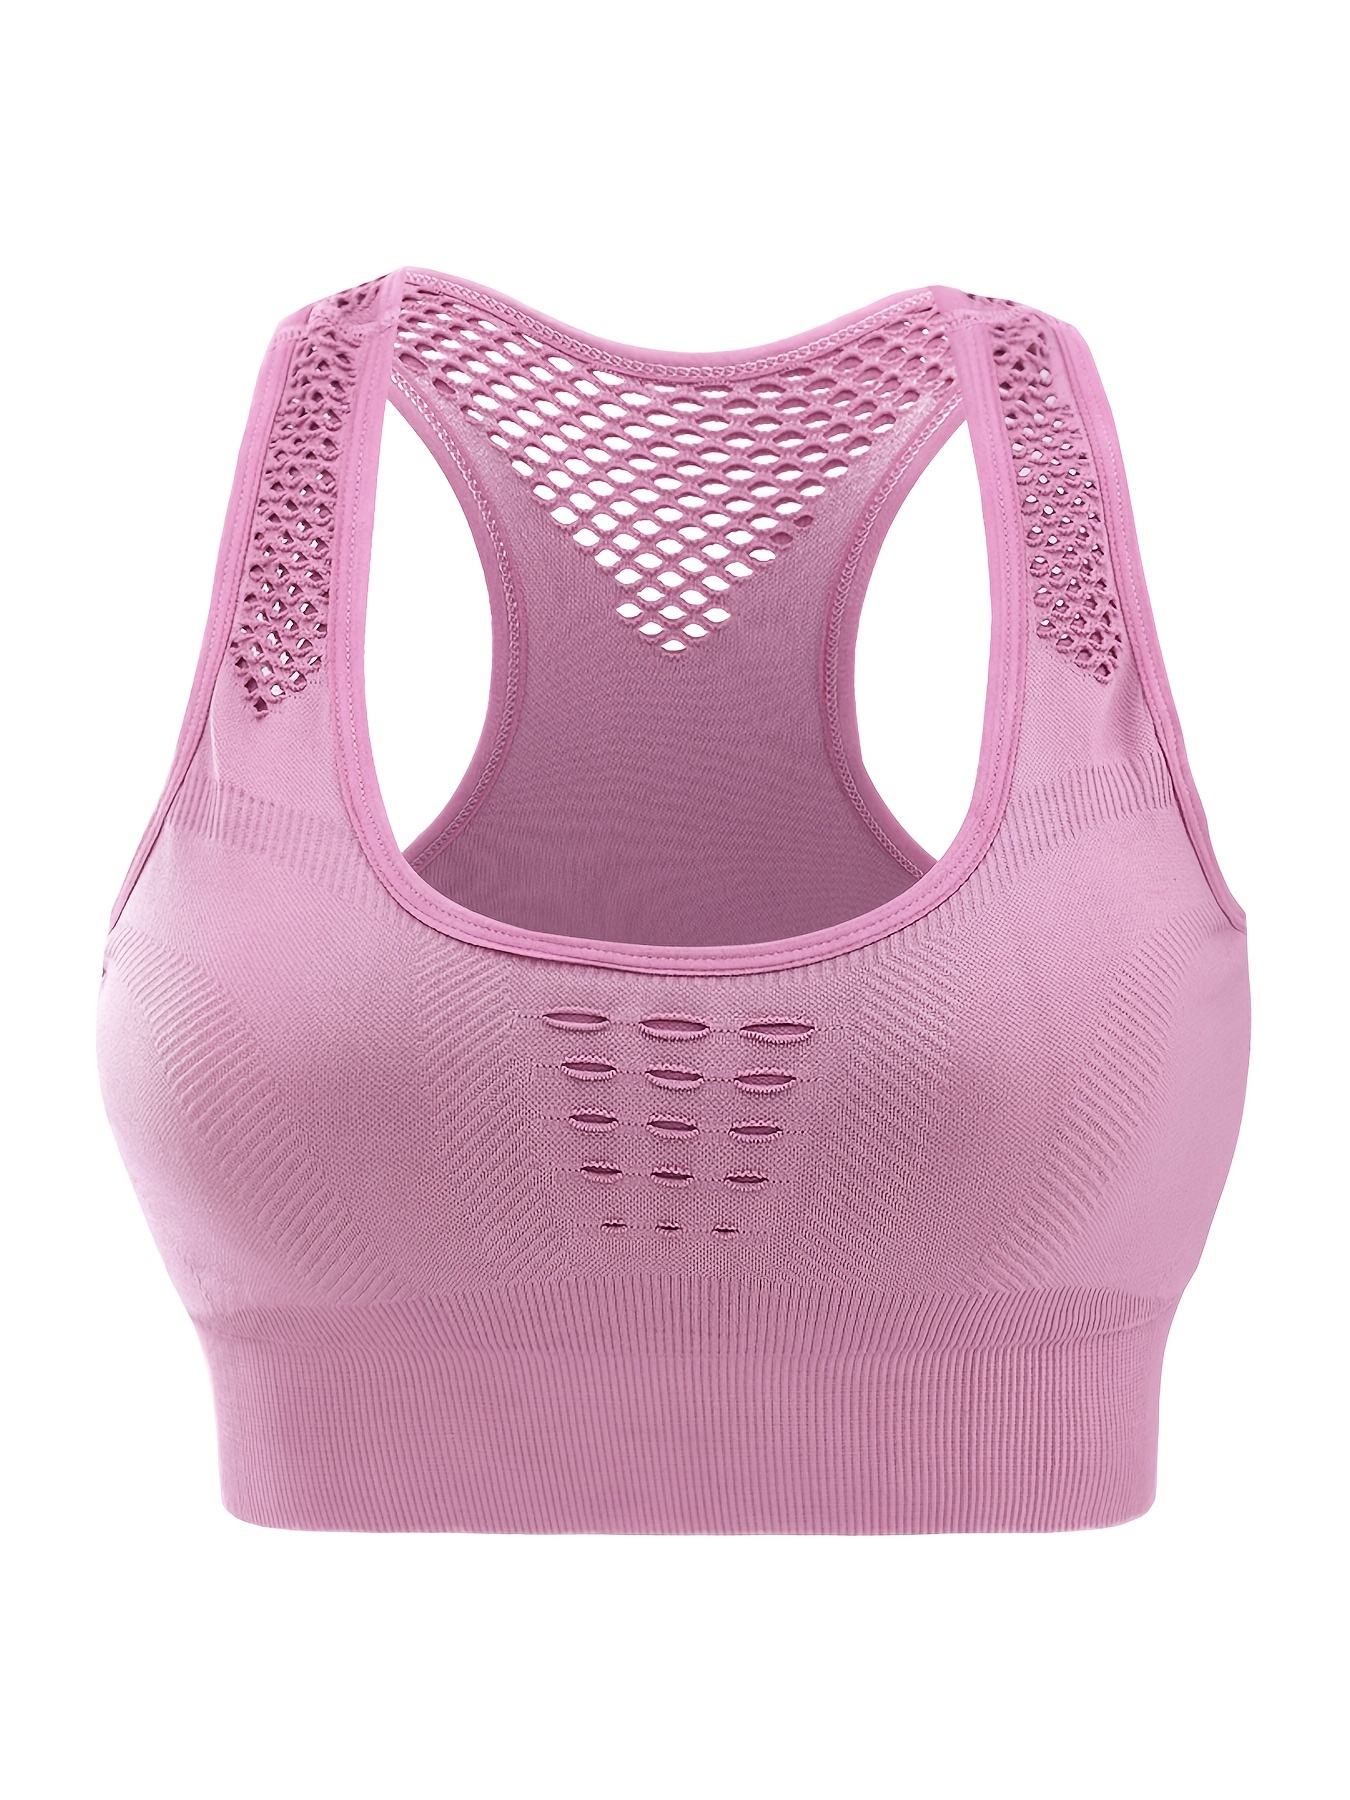 Women Sports Bra Wirefree Lingerie Hollow Out Breathable Yaga Vest